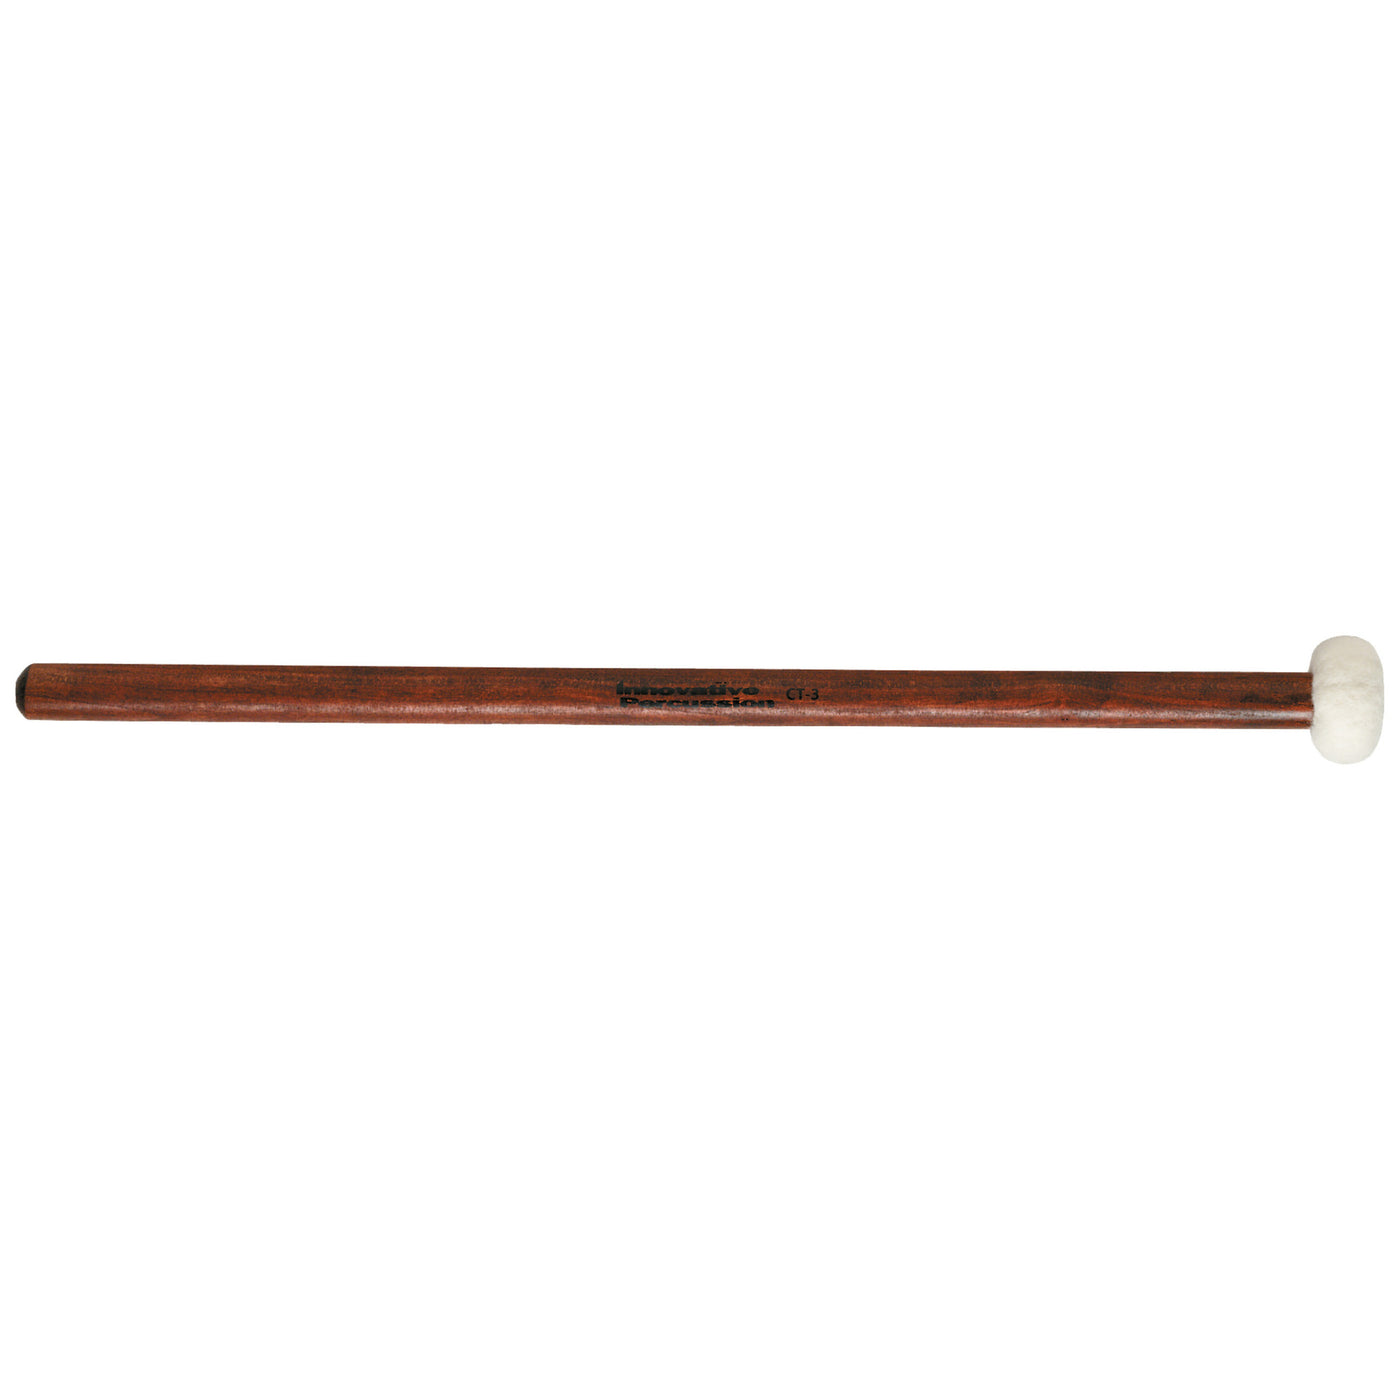 Innovative Percussion CT-3 Drum Mallet